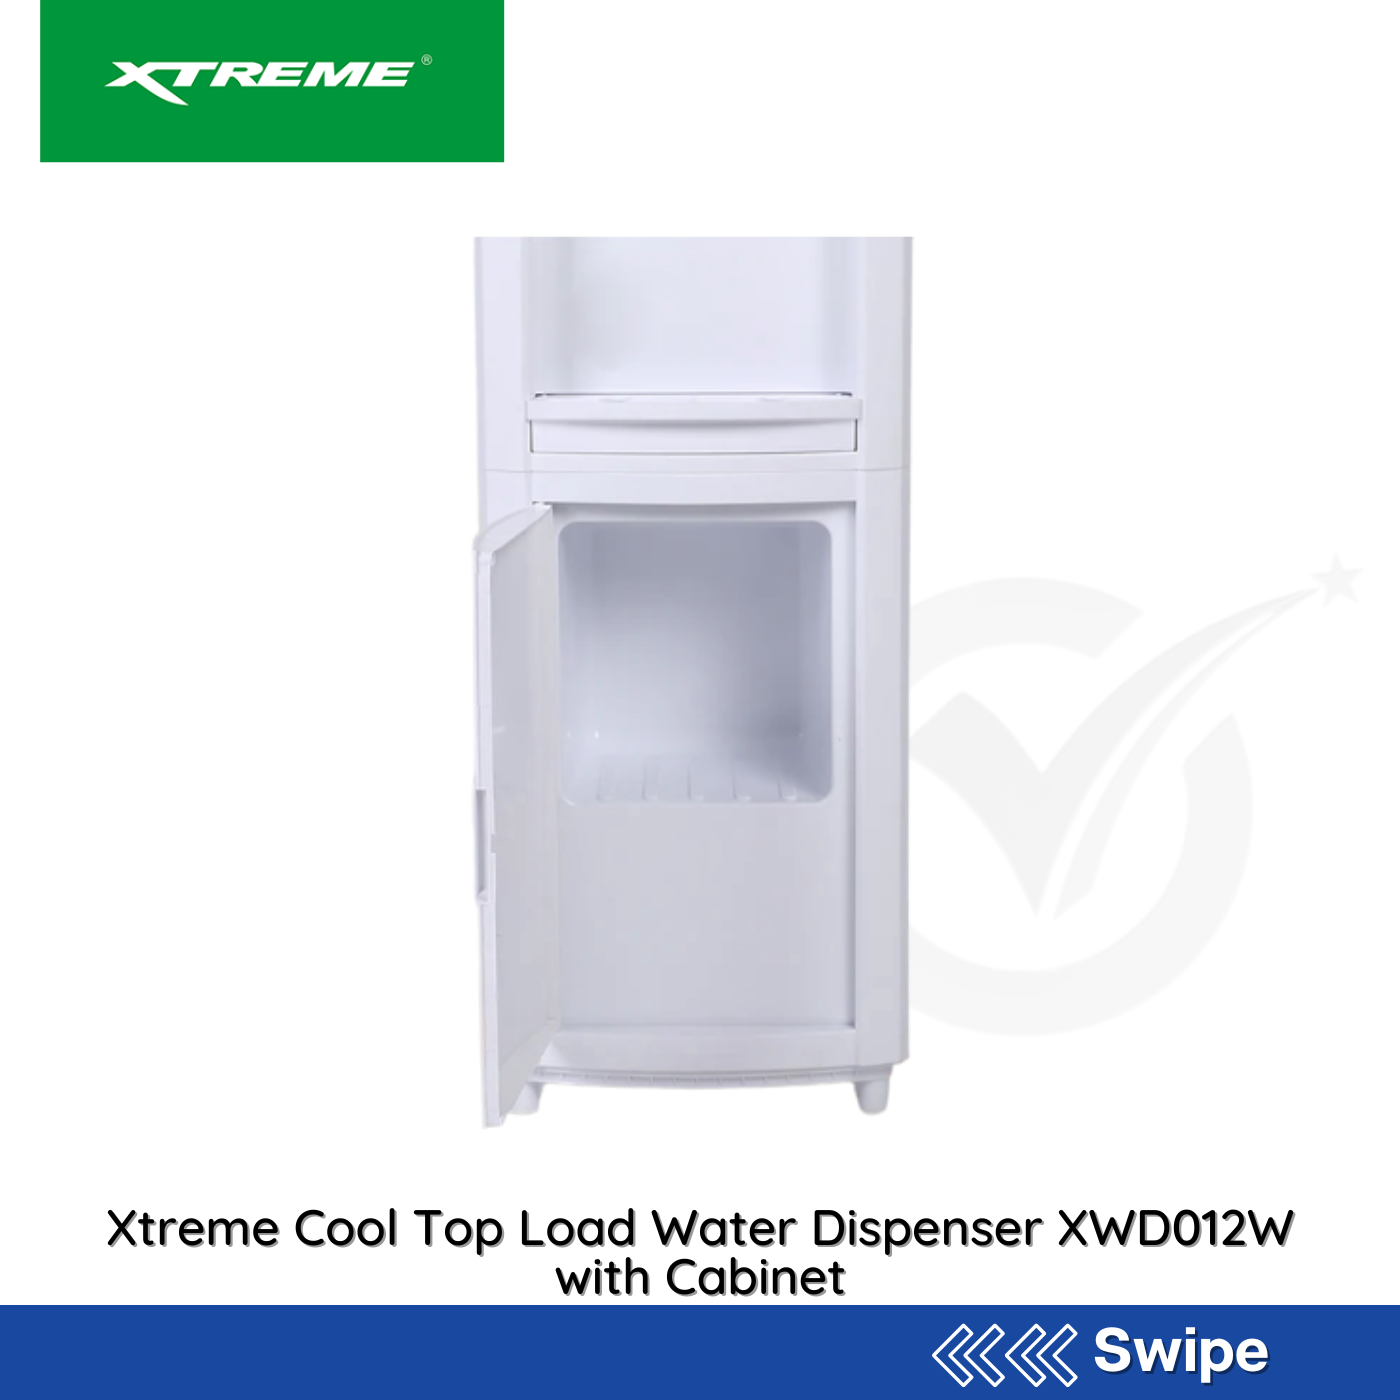 Xtreme Cool Top Load Water Dispenser XWD012W with Cabinet